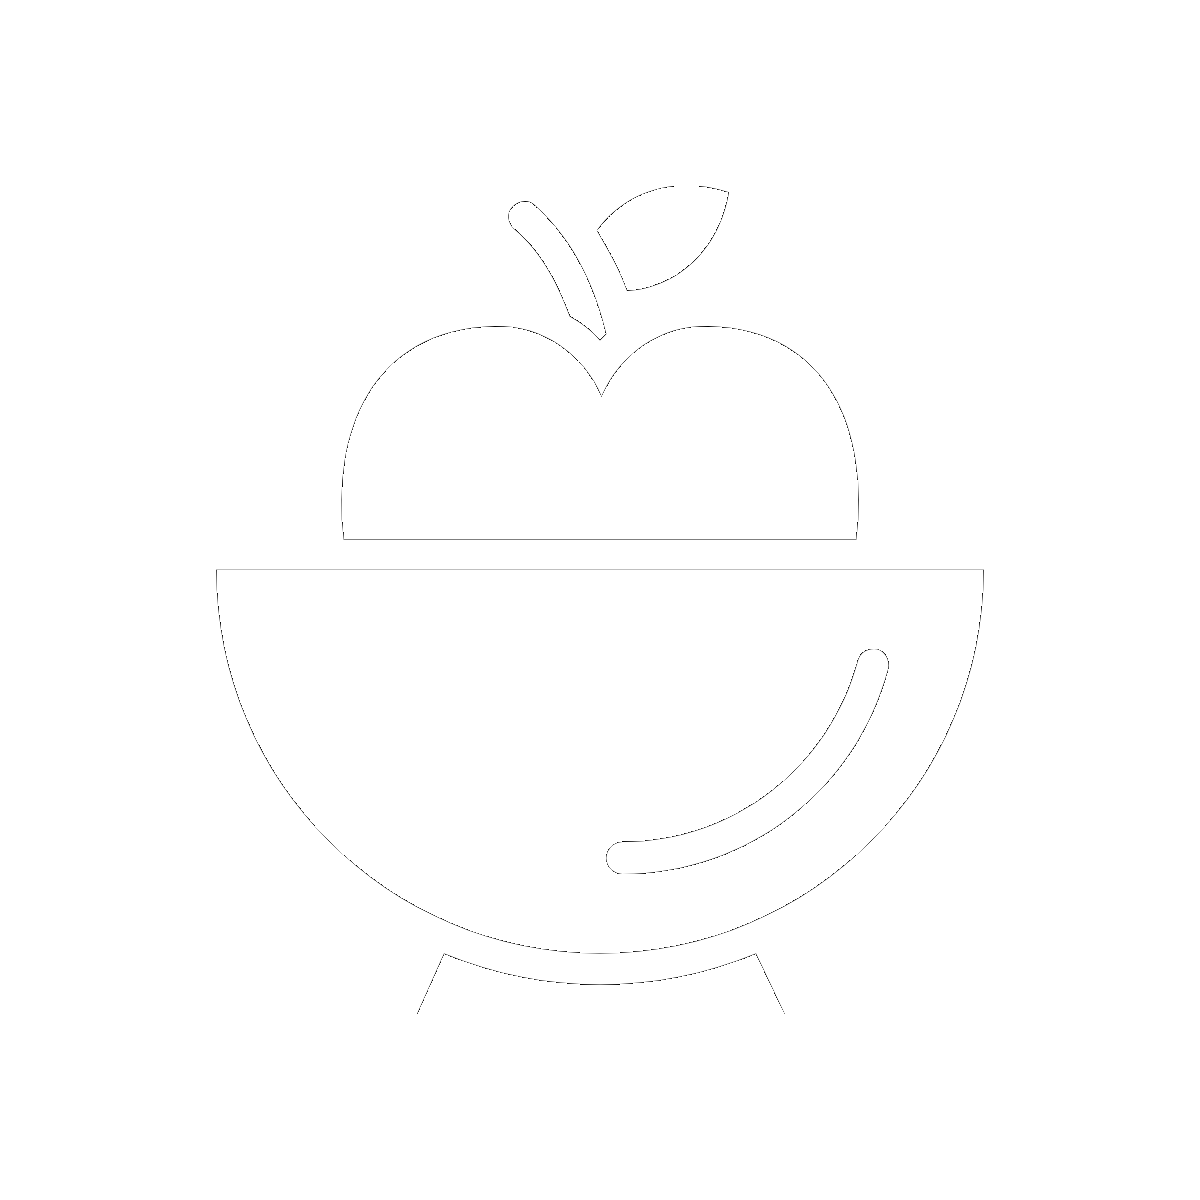 Symbol The Bowl of Apples